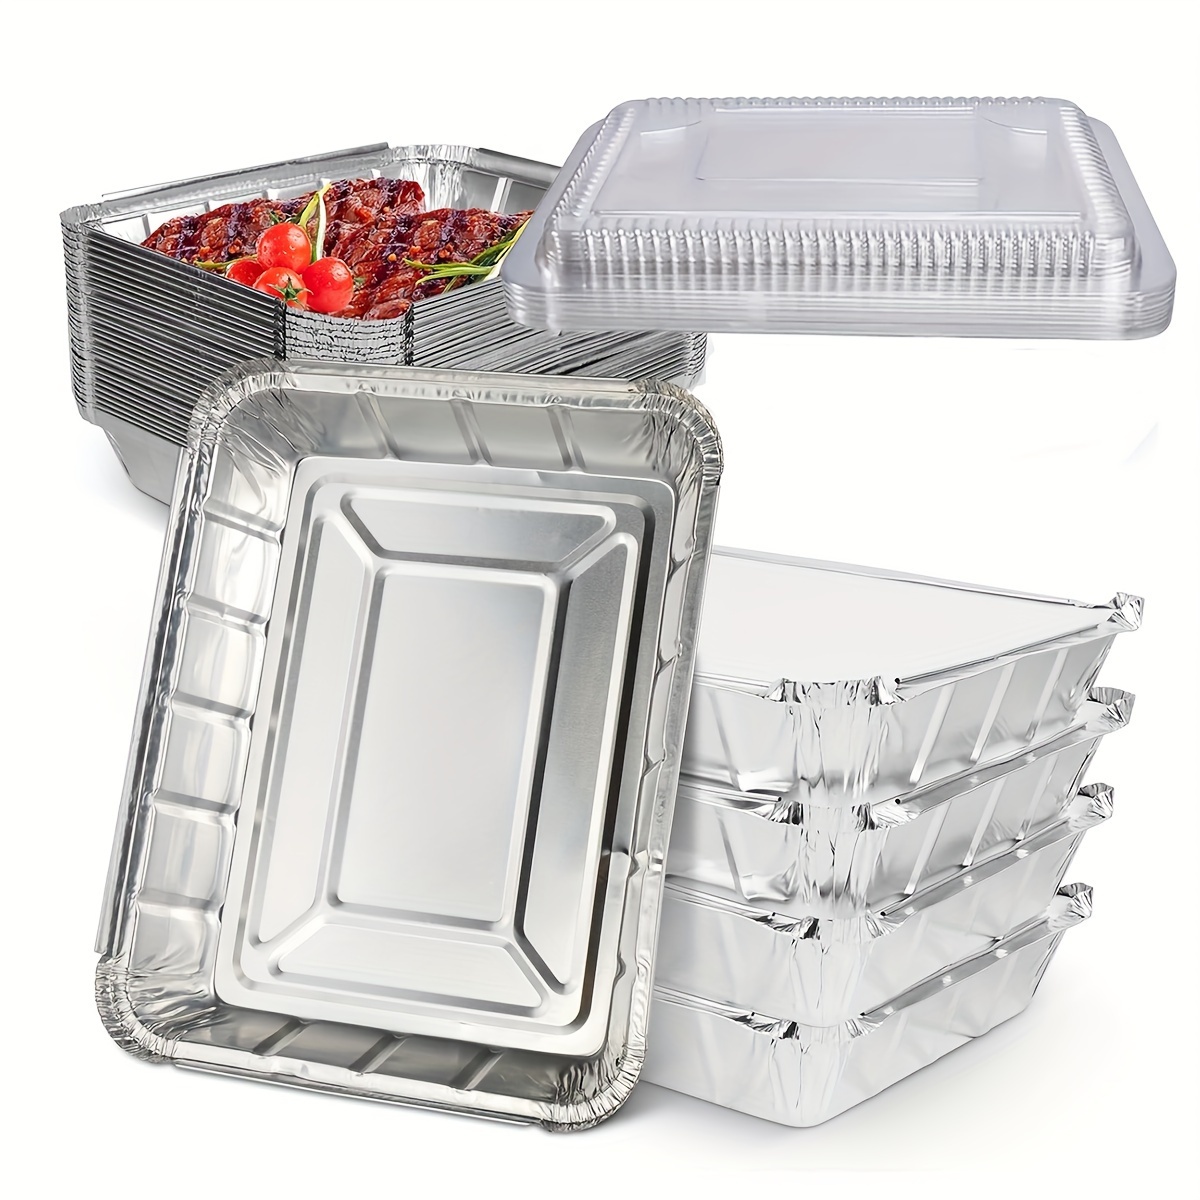 Aluminum Foil Pans With Clear Plastic Lids, Meal Prep Food Container  Tupperware Sets, Disposable Cookware, Takeout, Restaurants & Catering,  Leftover